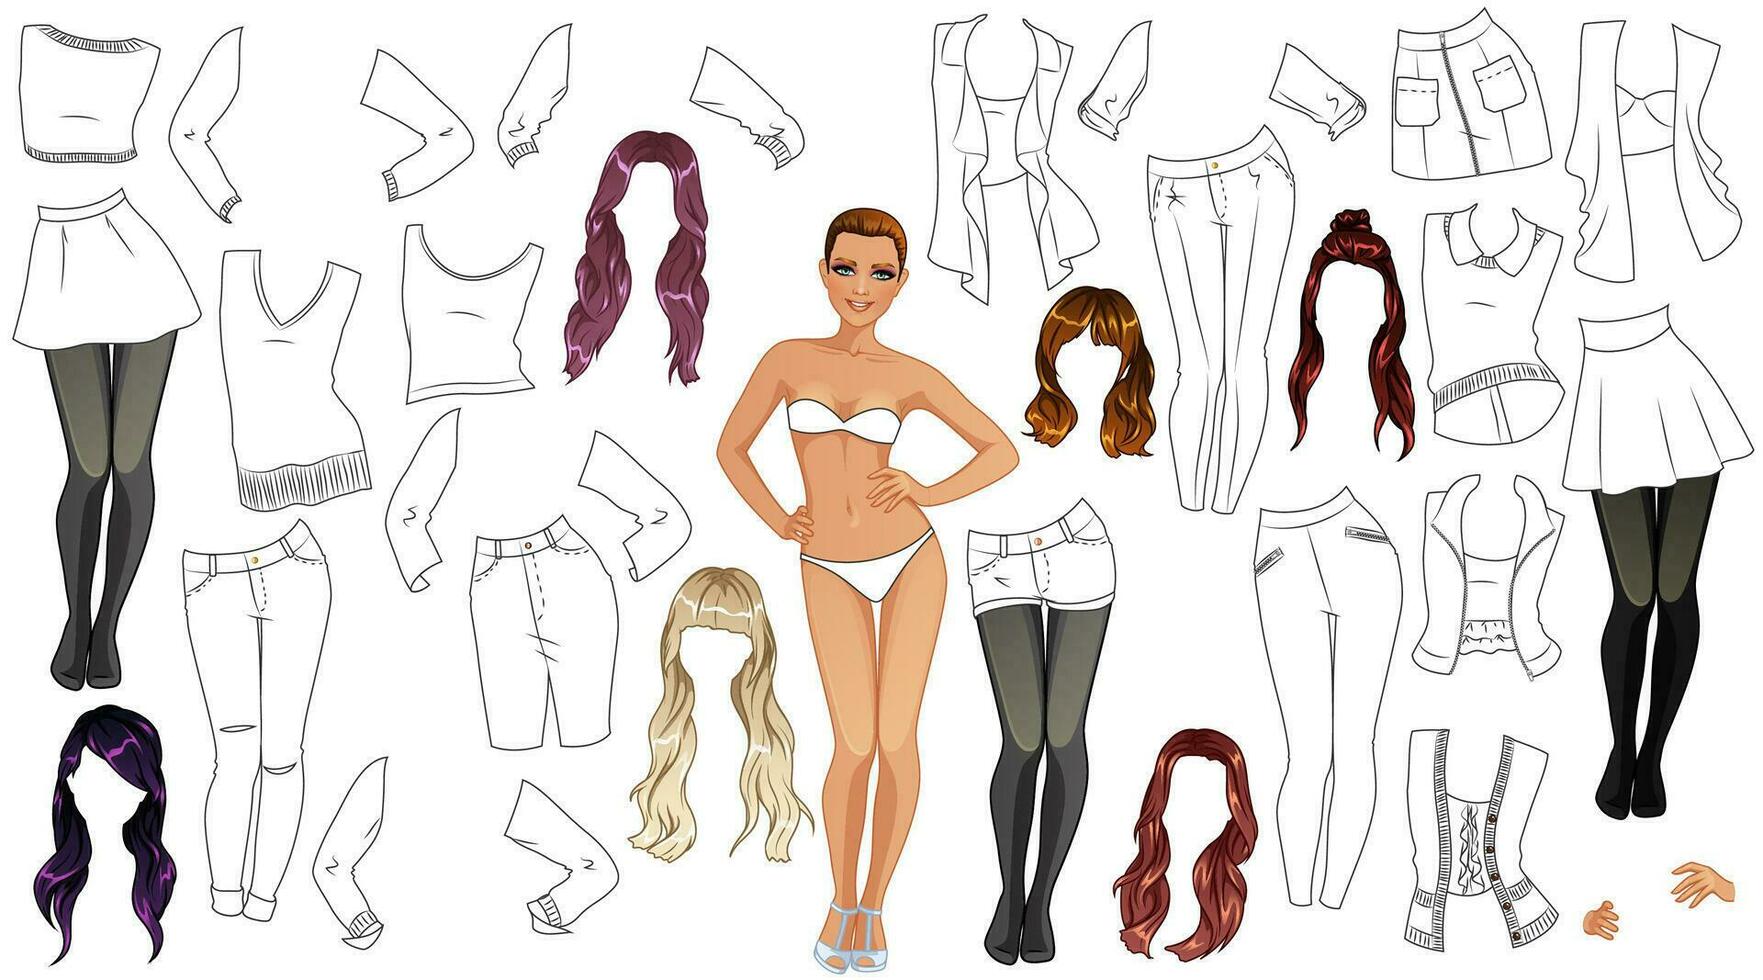 Fall Fashion Coloring Page Paper Doll with Cute Cartoon Character, Clothes and Hairstyles. Vector Illustration